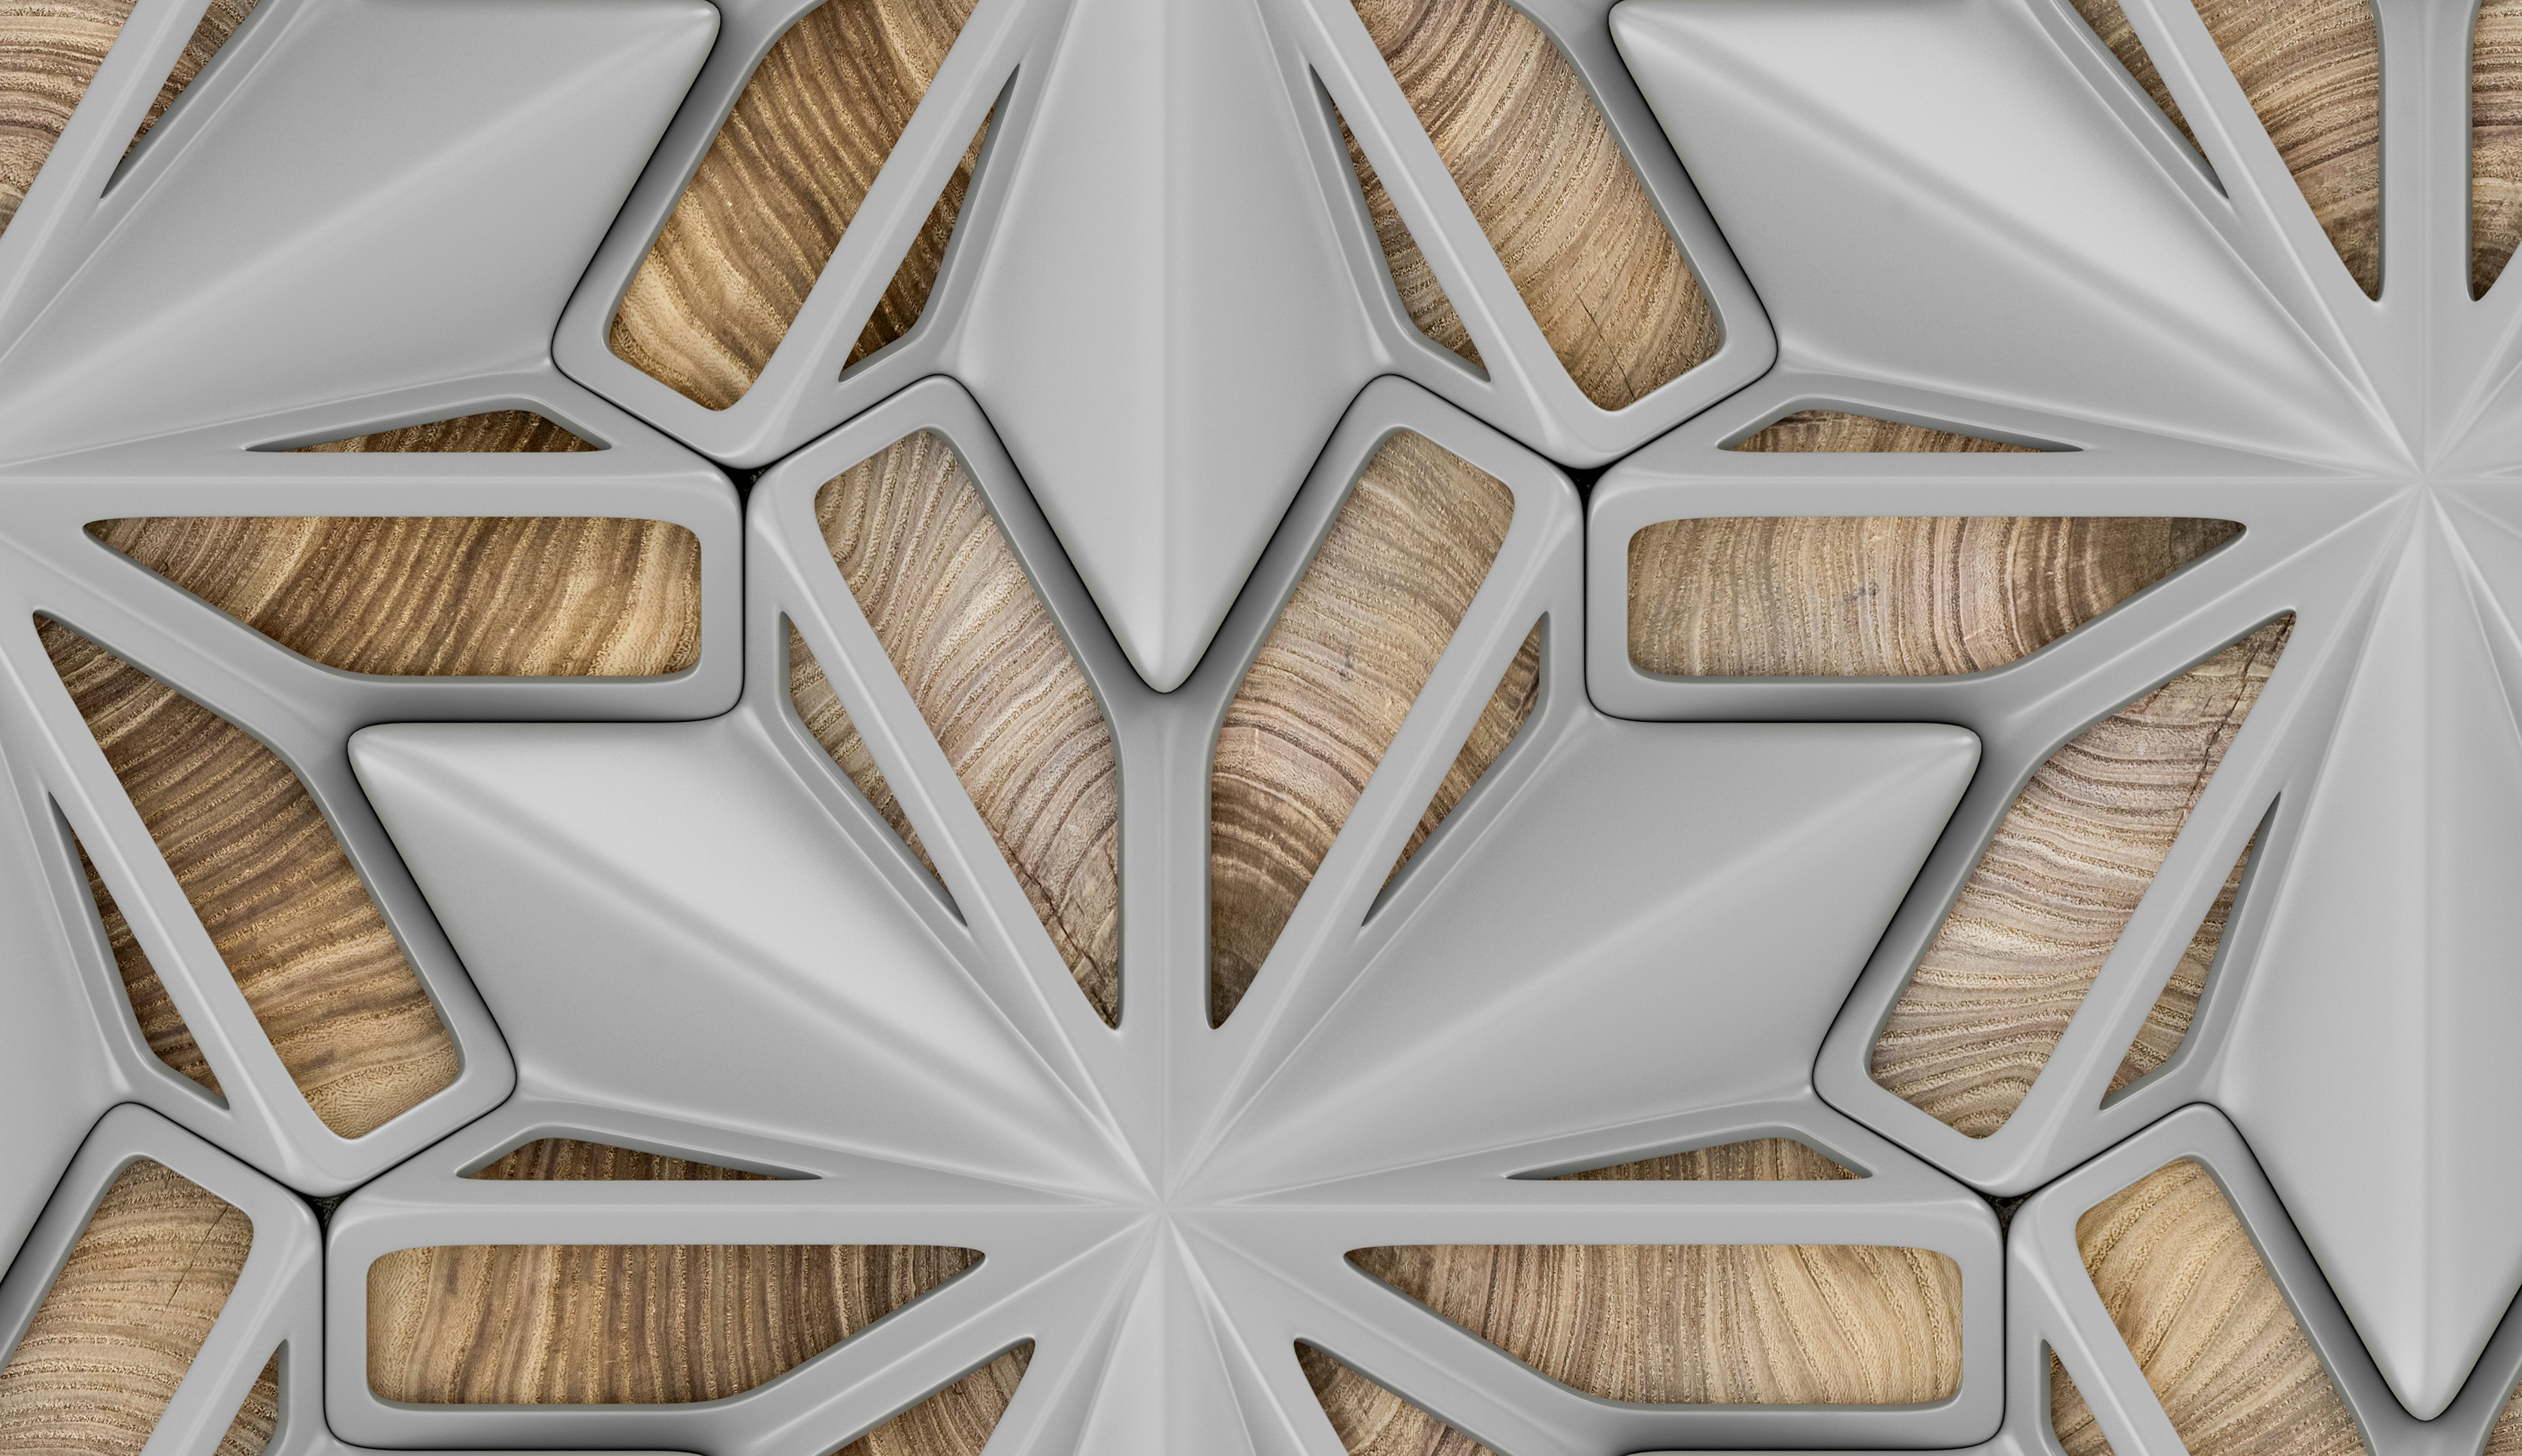 3d gray lattice tiles on wooden walnut background. Material wood walnut. High quality seamless realistic pattern.